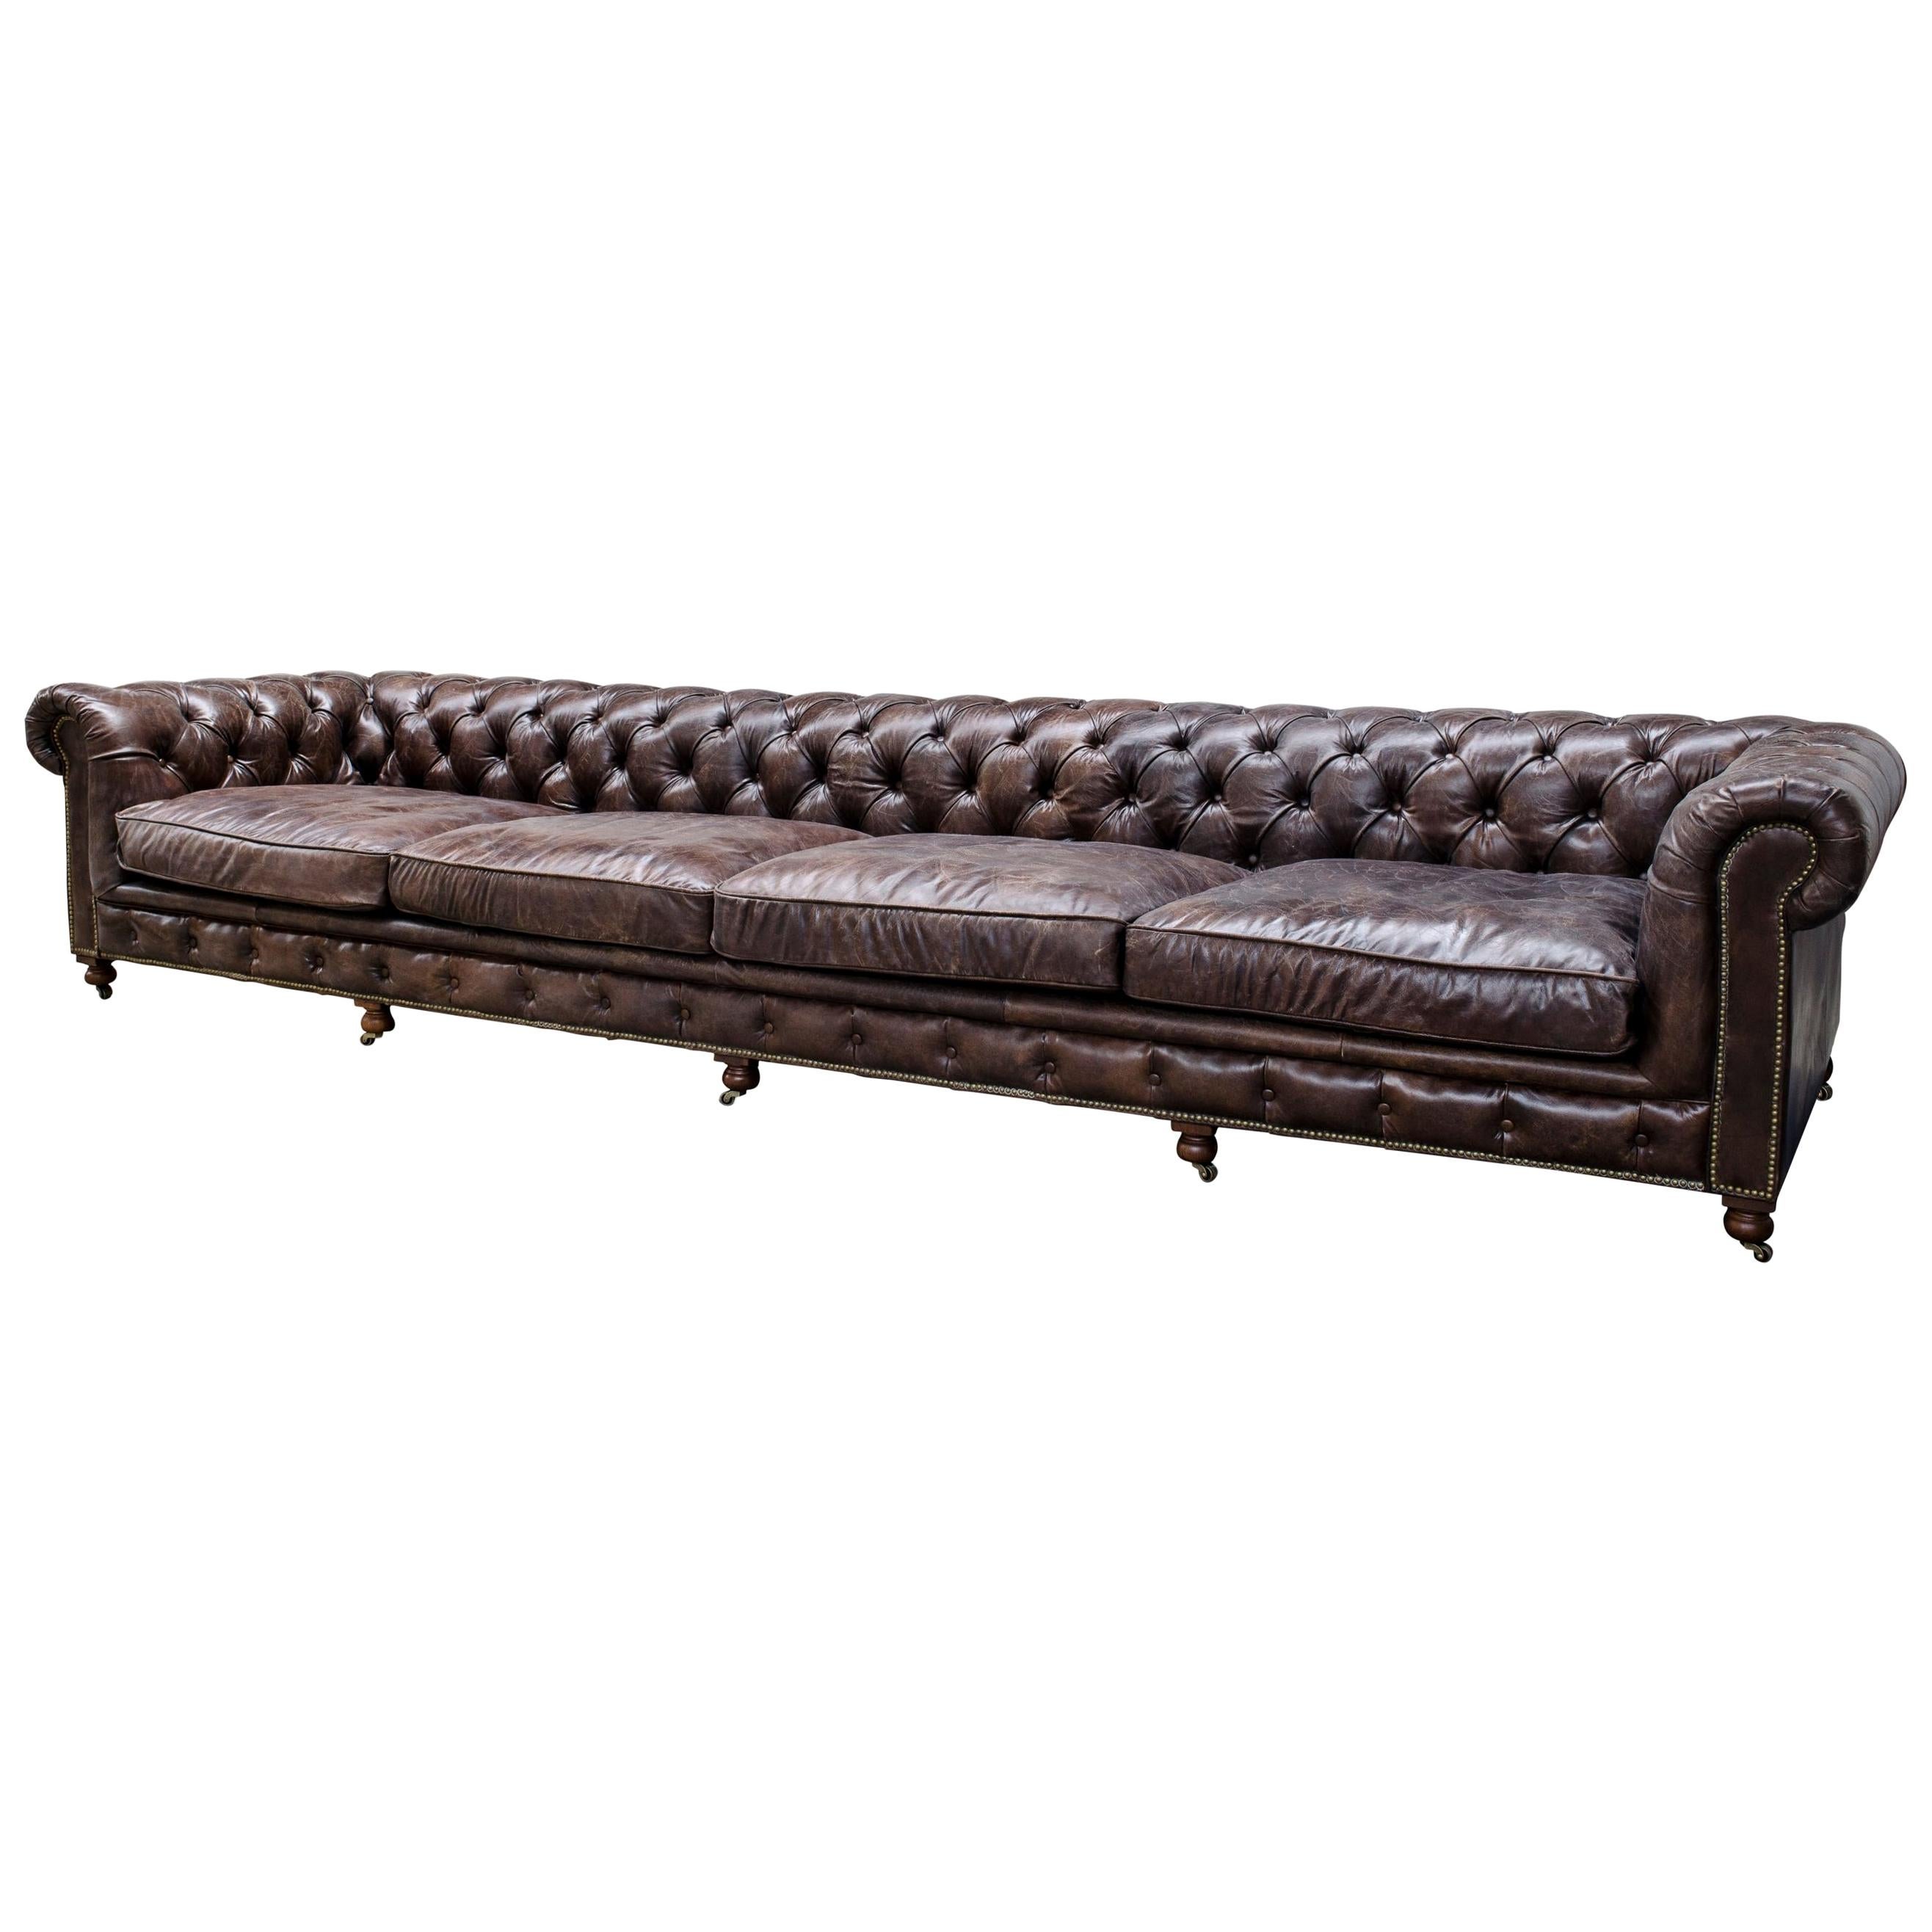 Vintage Brown Leather and Wooden Feet Chesterfield Extra Large Sofa